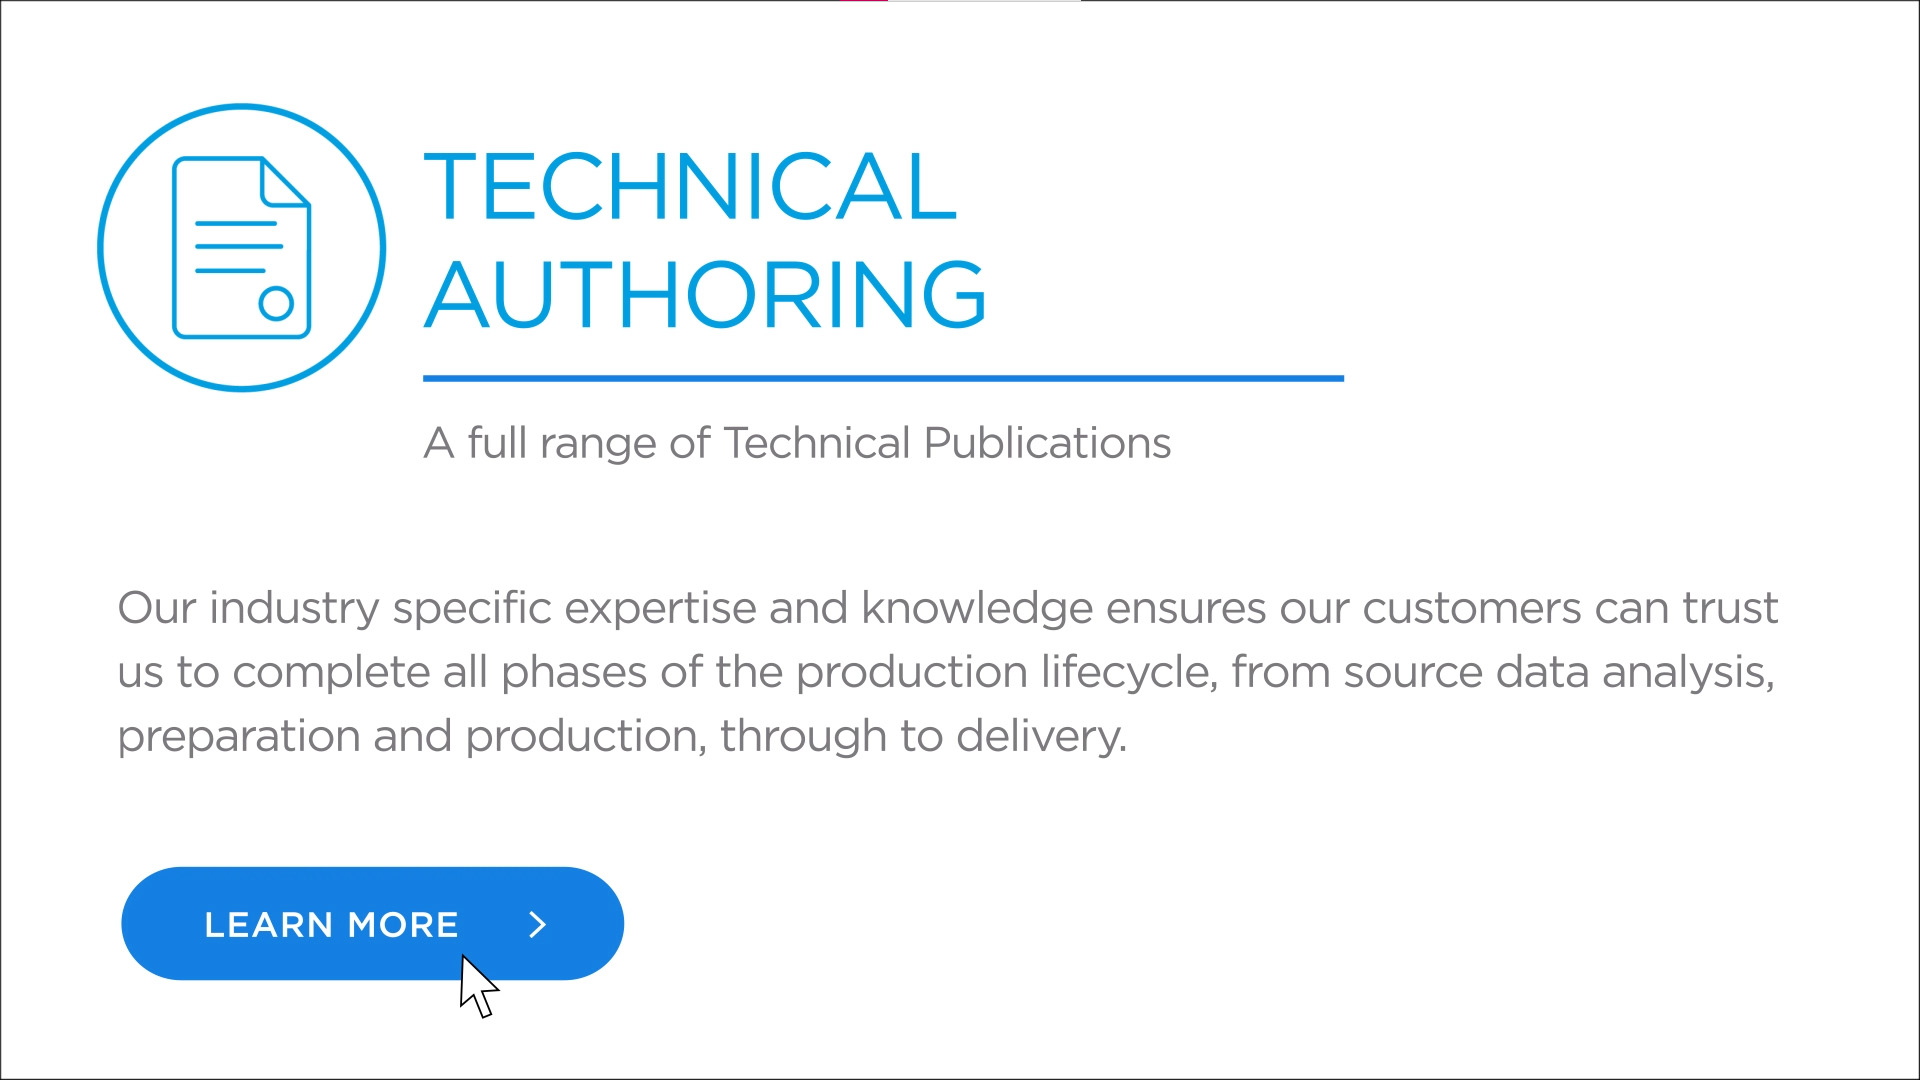 Technical Authoring